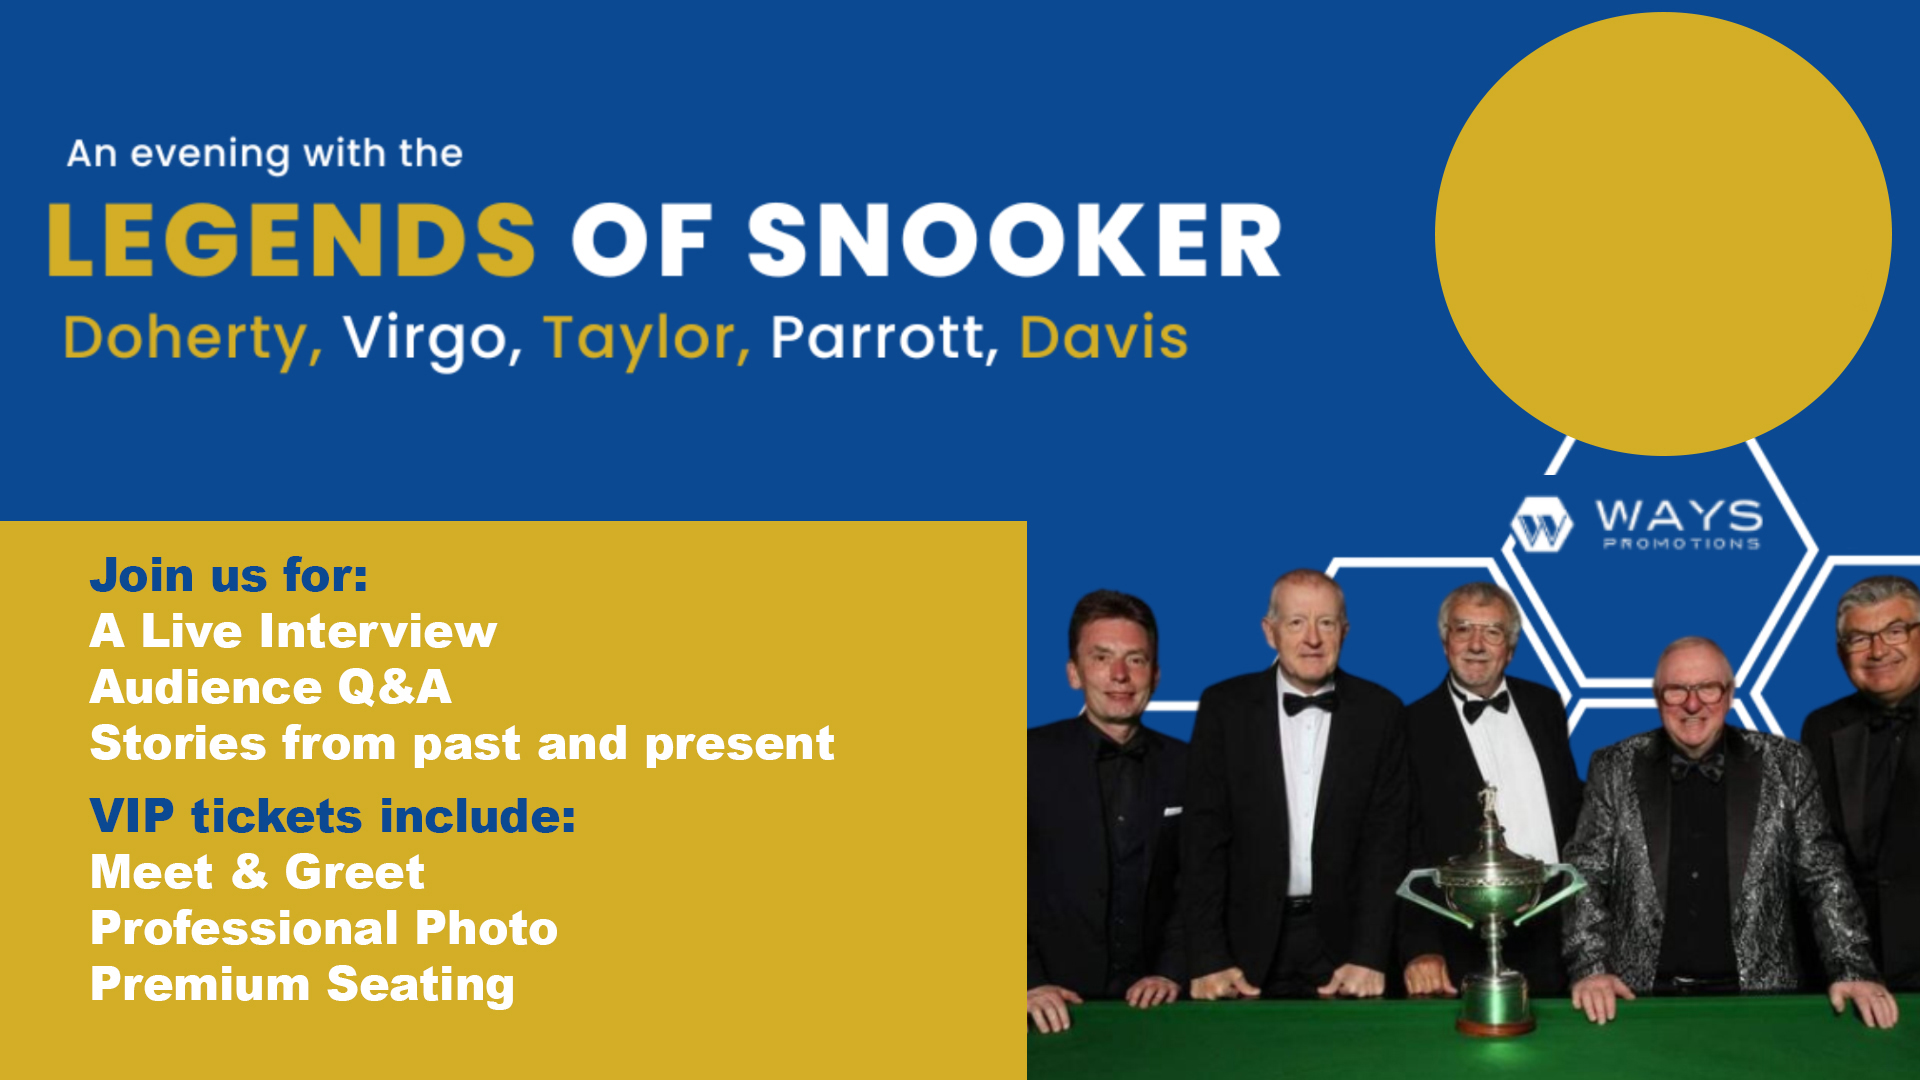 An Evening with the Legends of Snooker